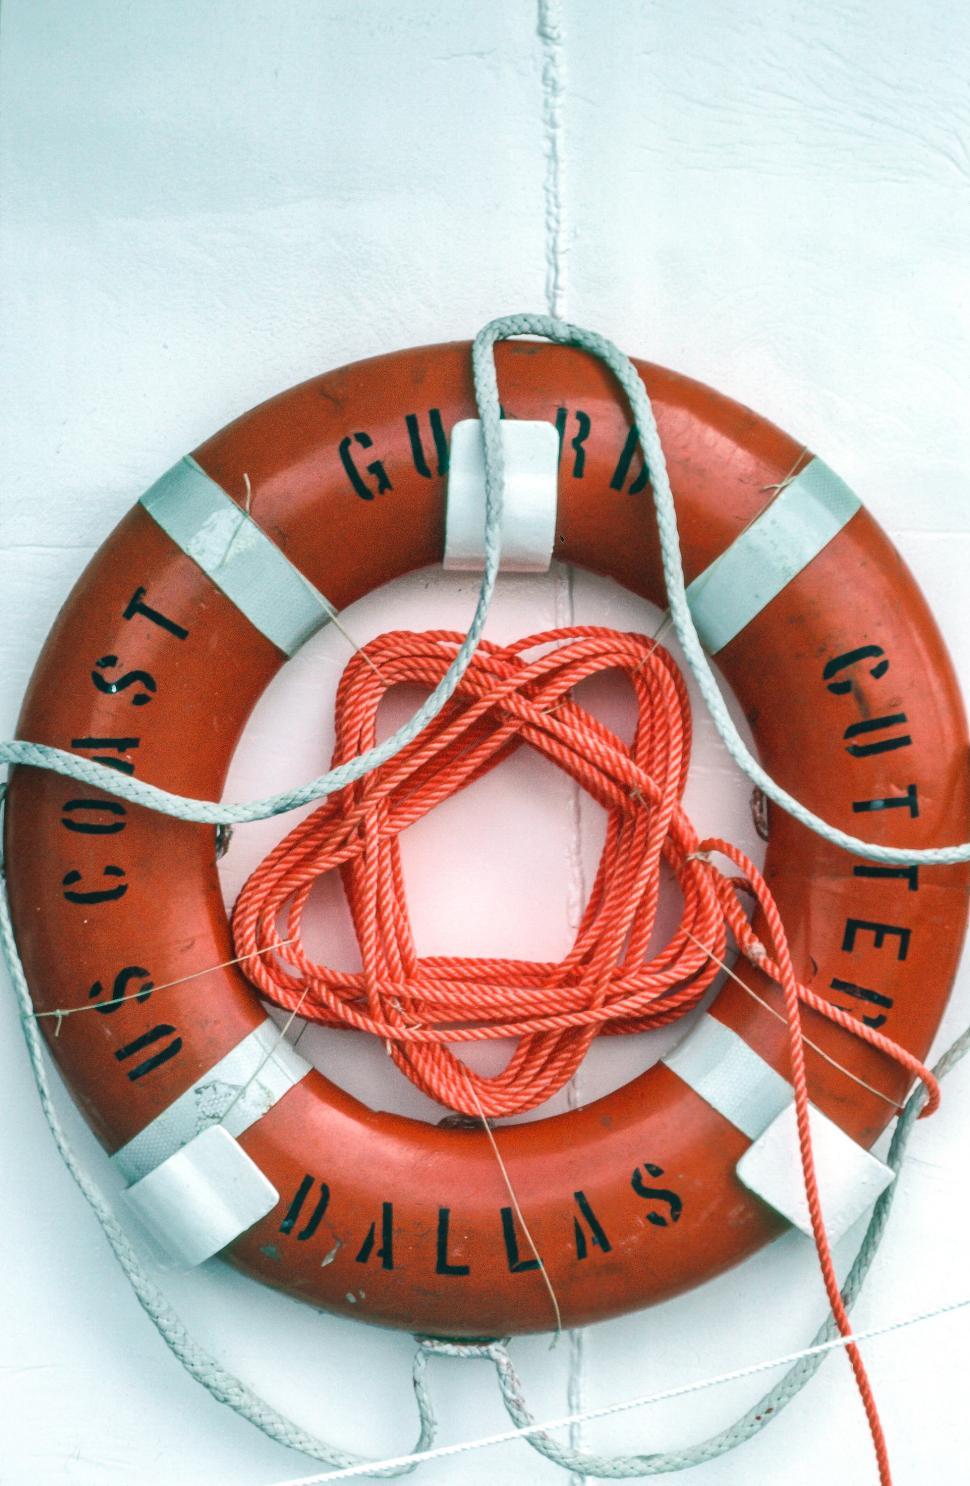 Free Image of Red lifesaver float 